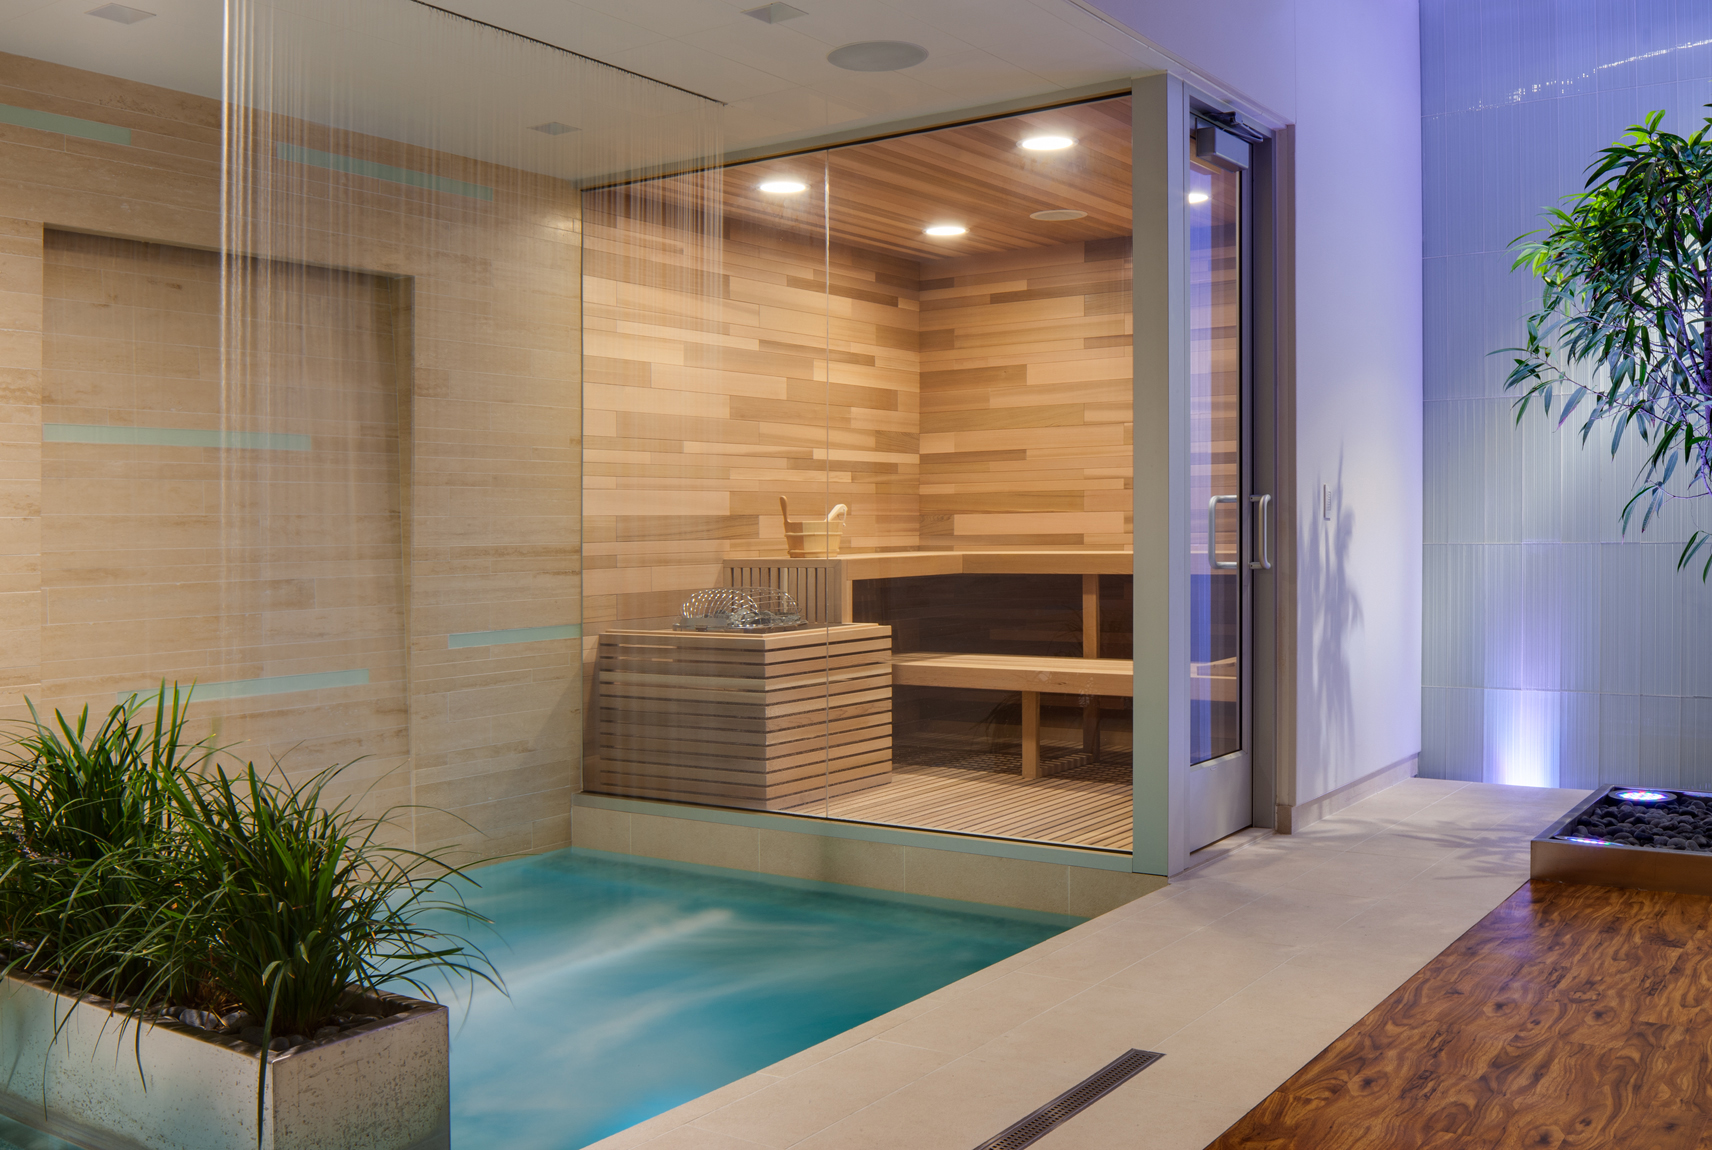 Spa room featuring cascading water, purple LED lighting and a wood clad sauna.